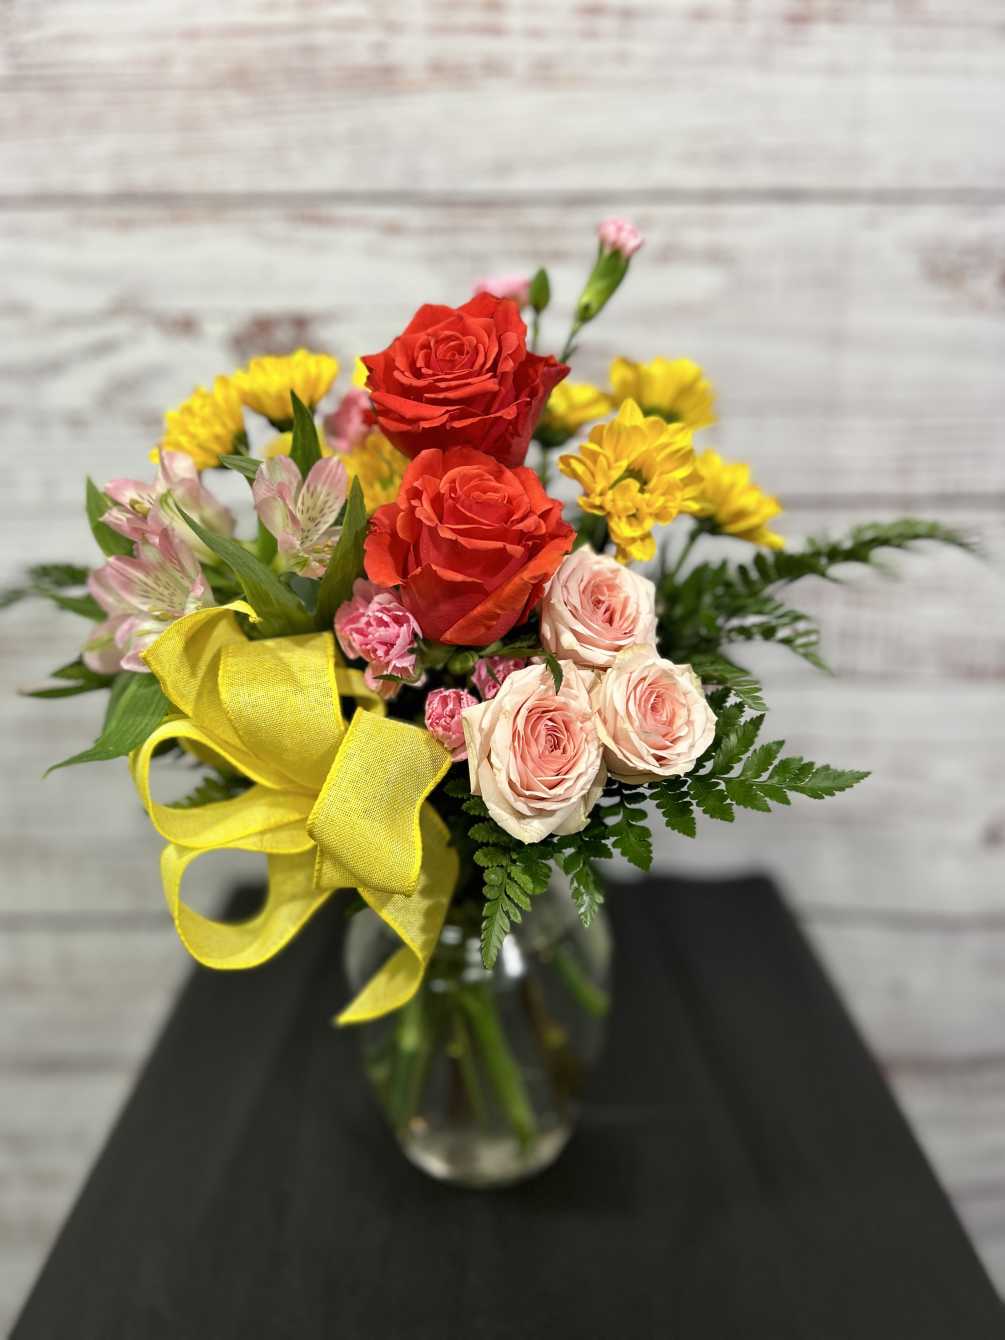 This lovely bouquet of orange roses, pink alstroemeria and pink spray roses